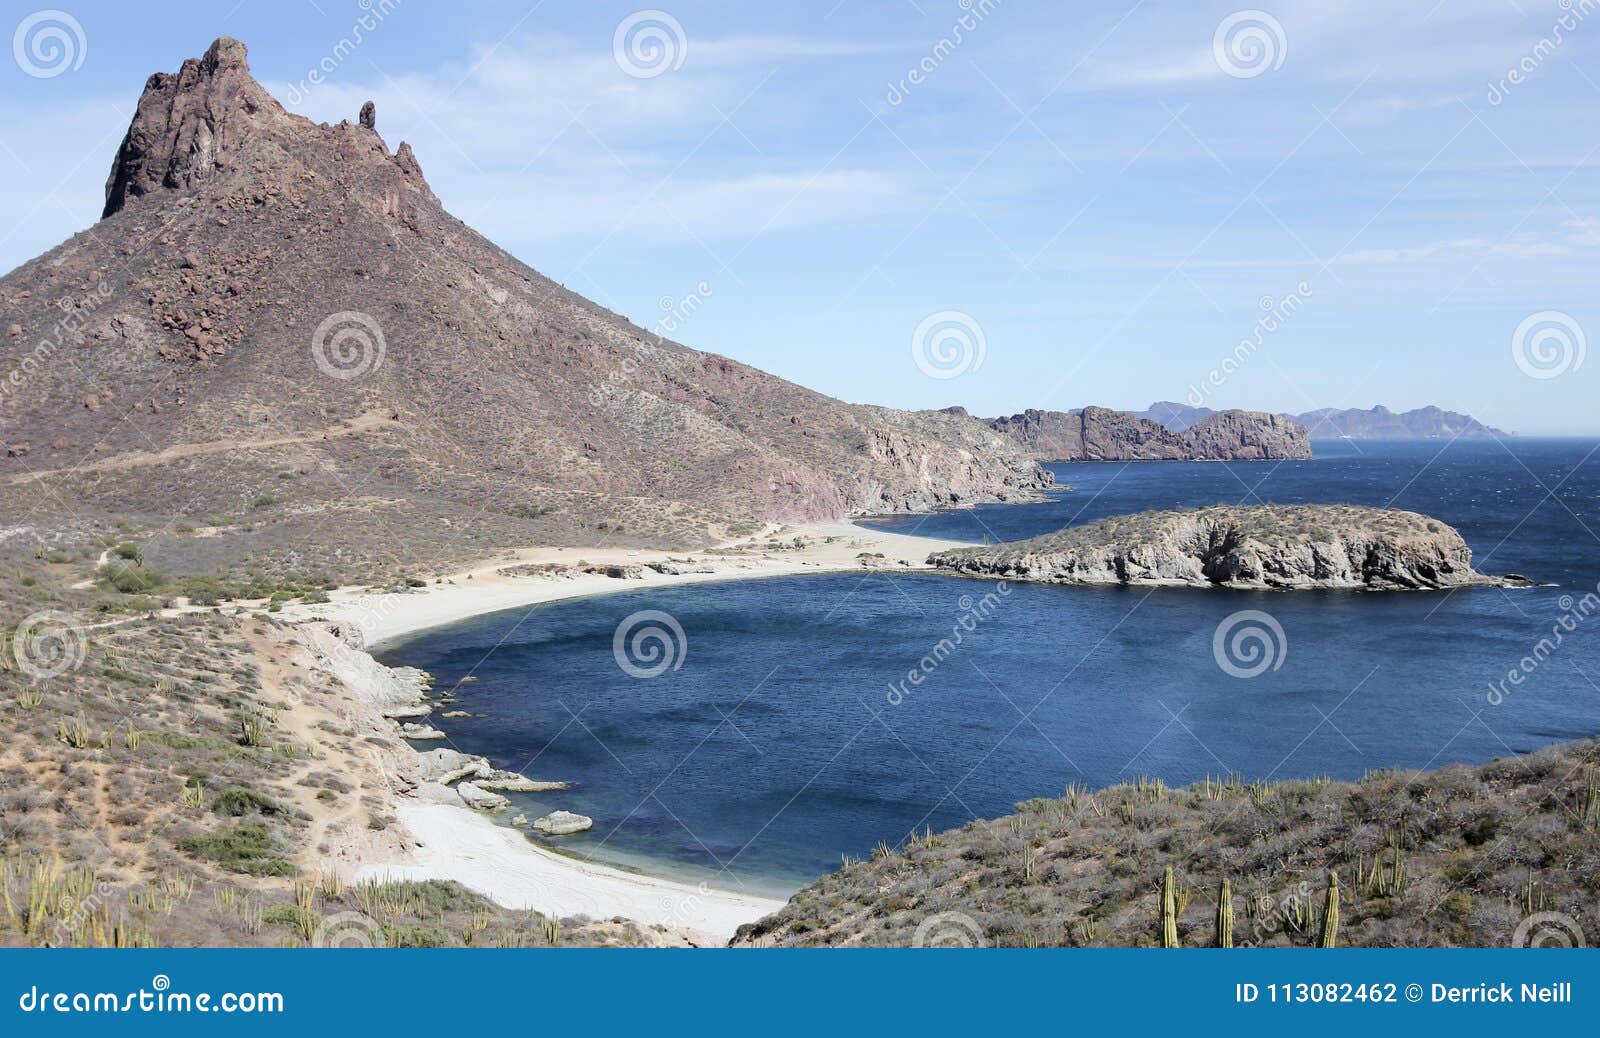 a scenic view from mirador lookout, san carlos, sonora, mexico